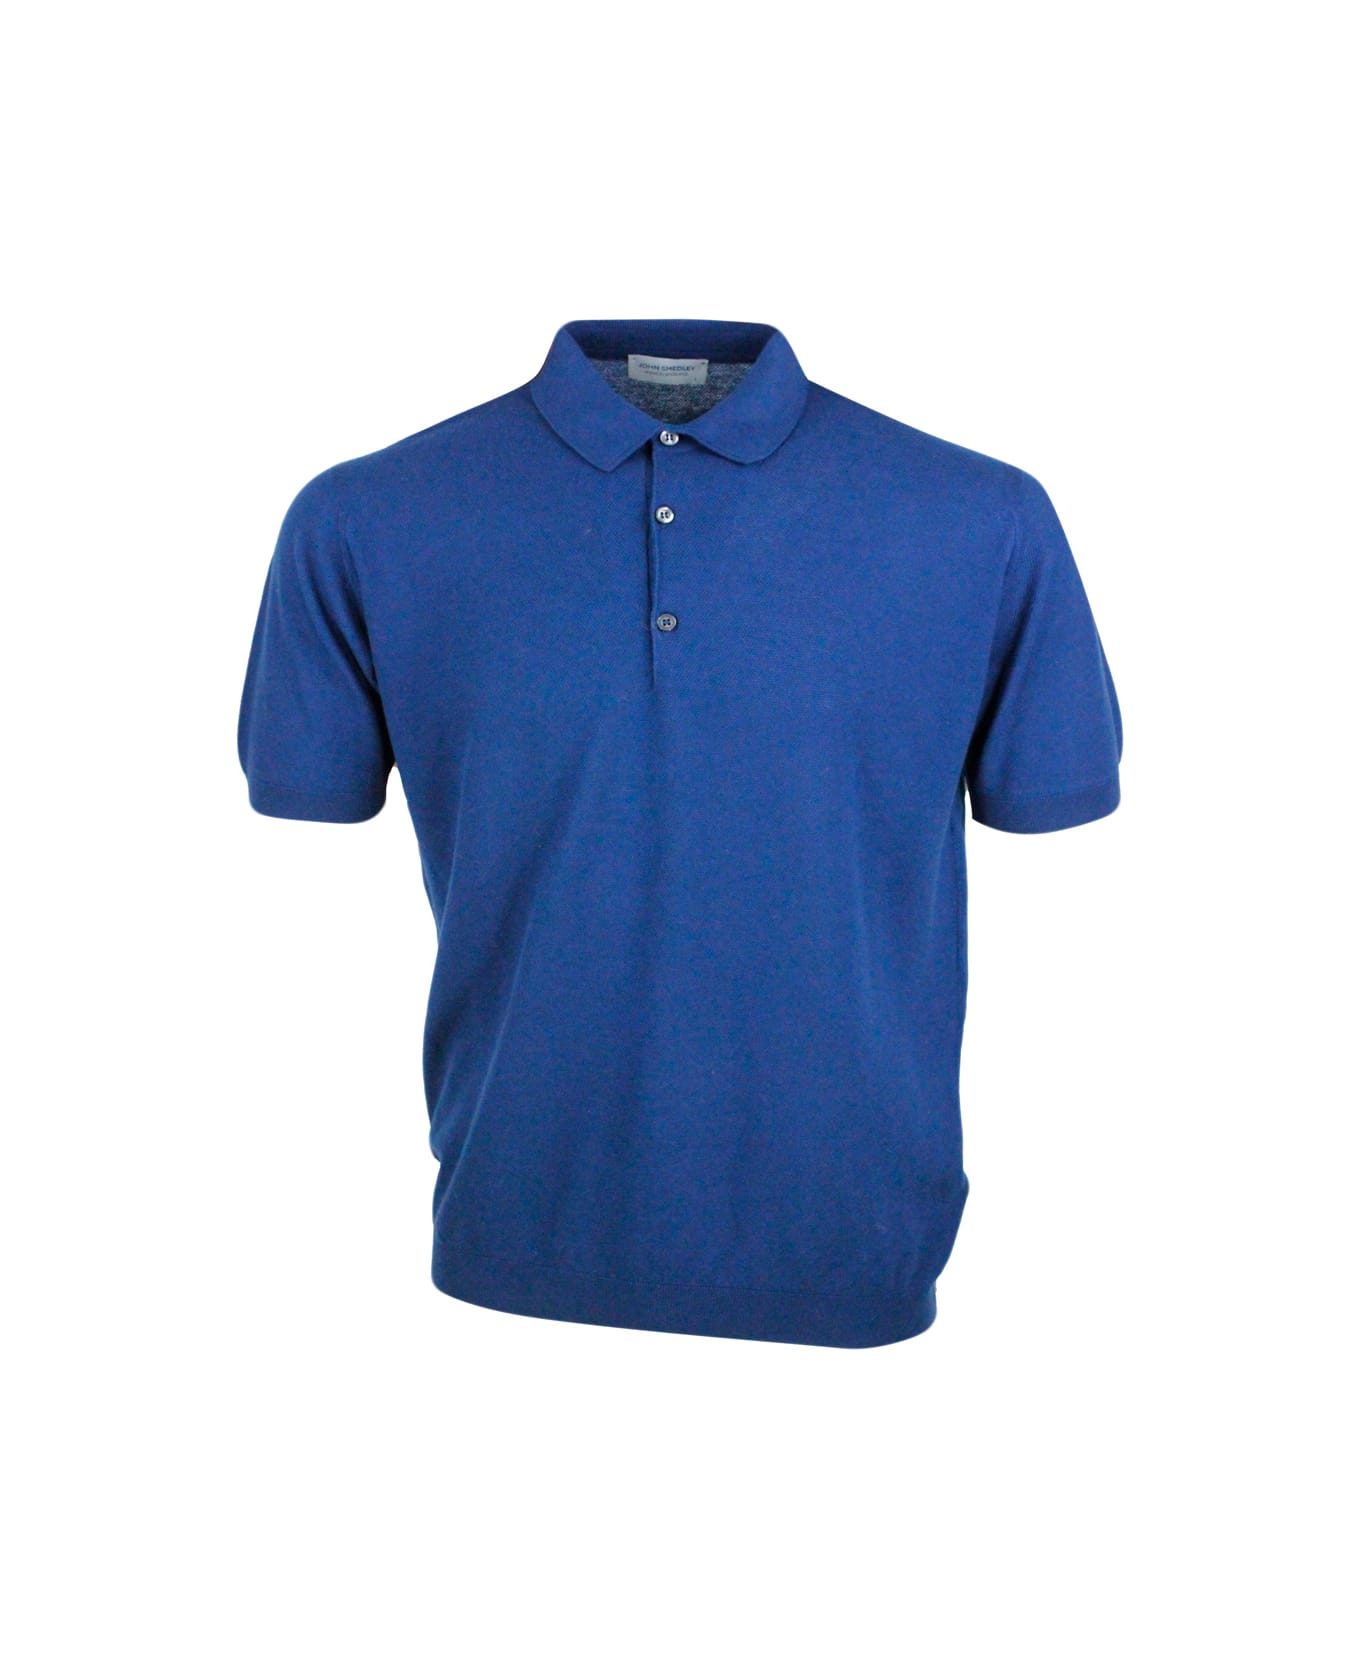 John Smedley Short-sleeved Polo Shirt In Extrafine Piqué Cotton Thread With Three Buttons - Blu clear